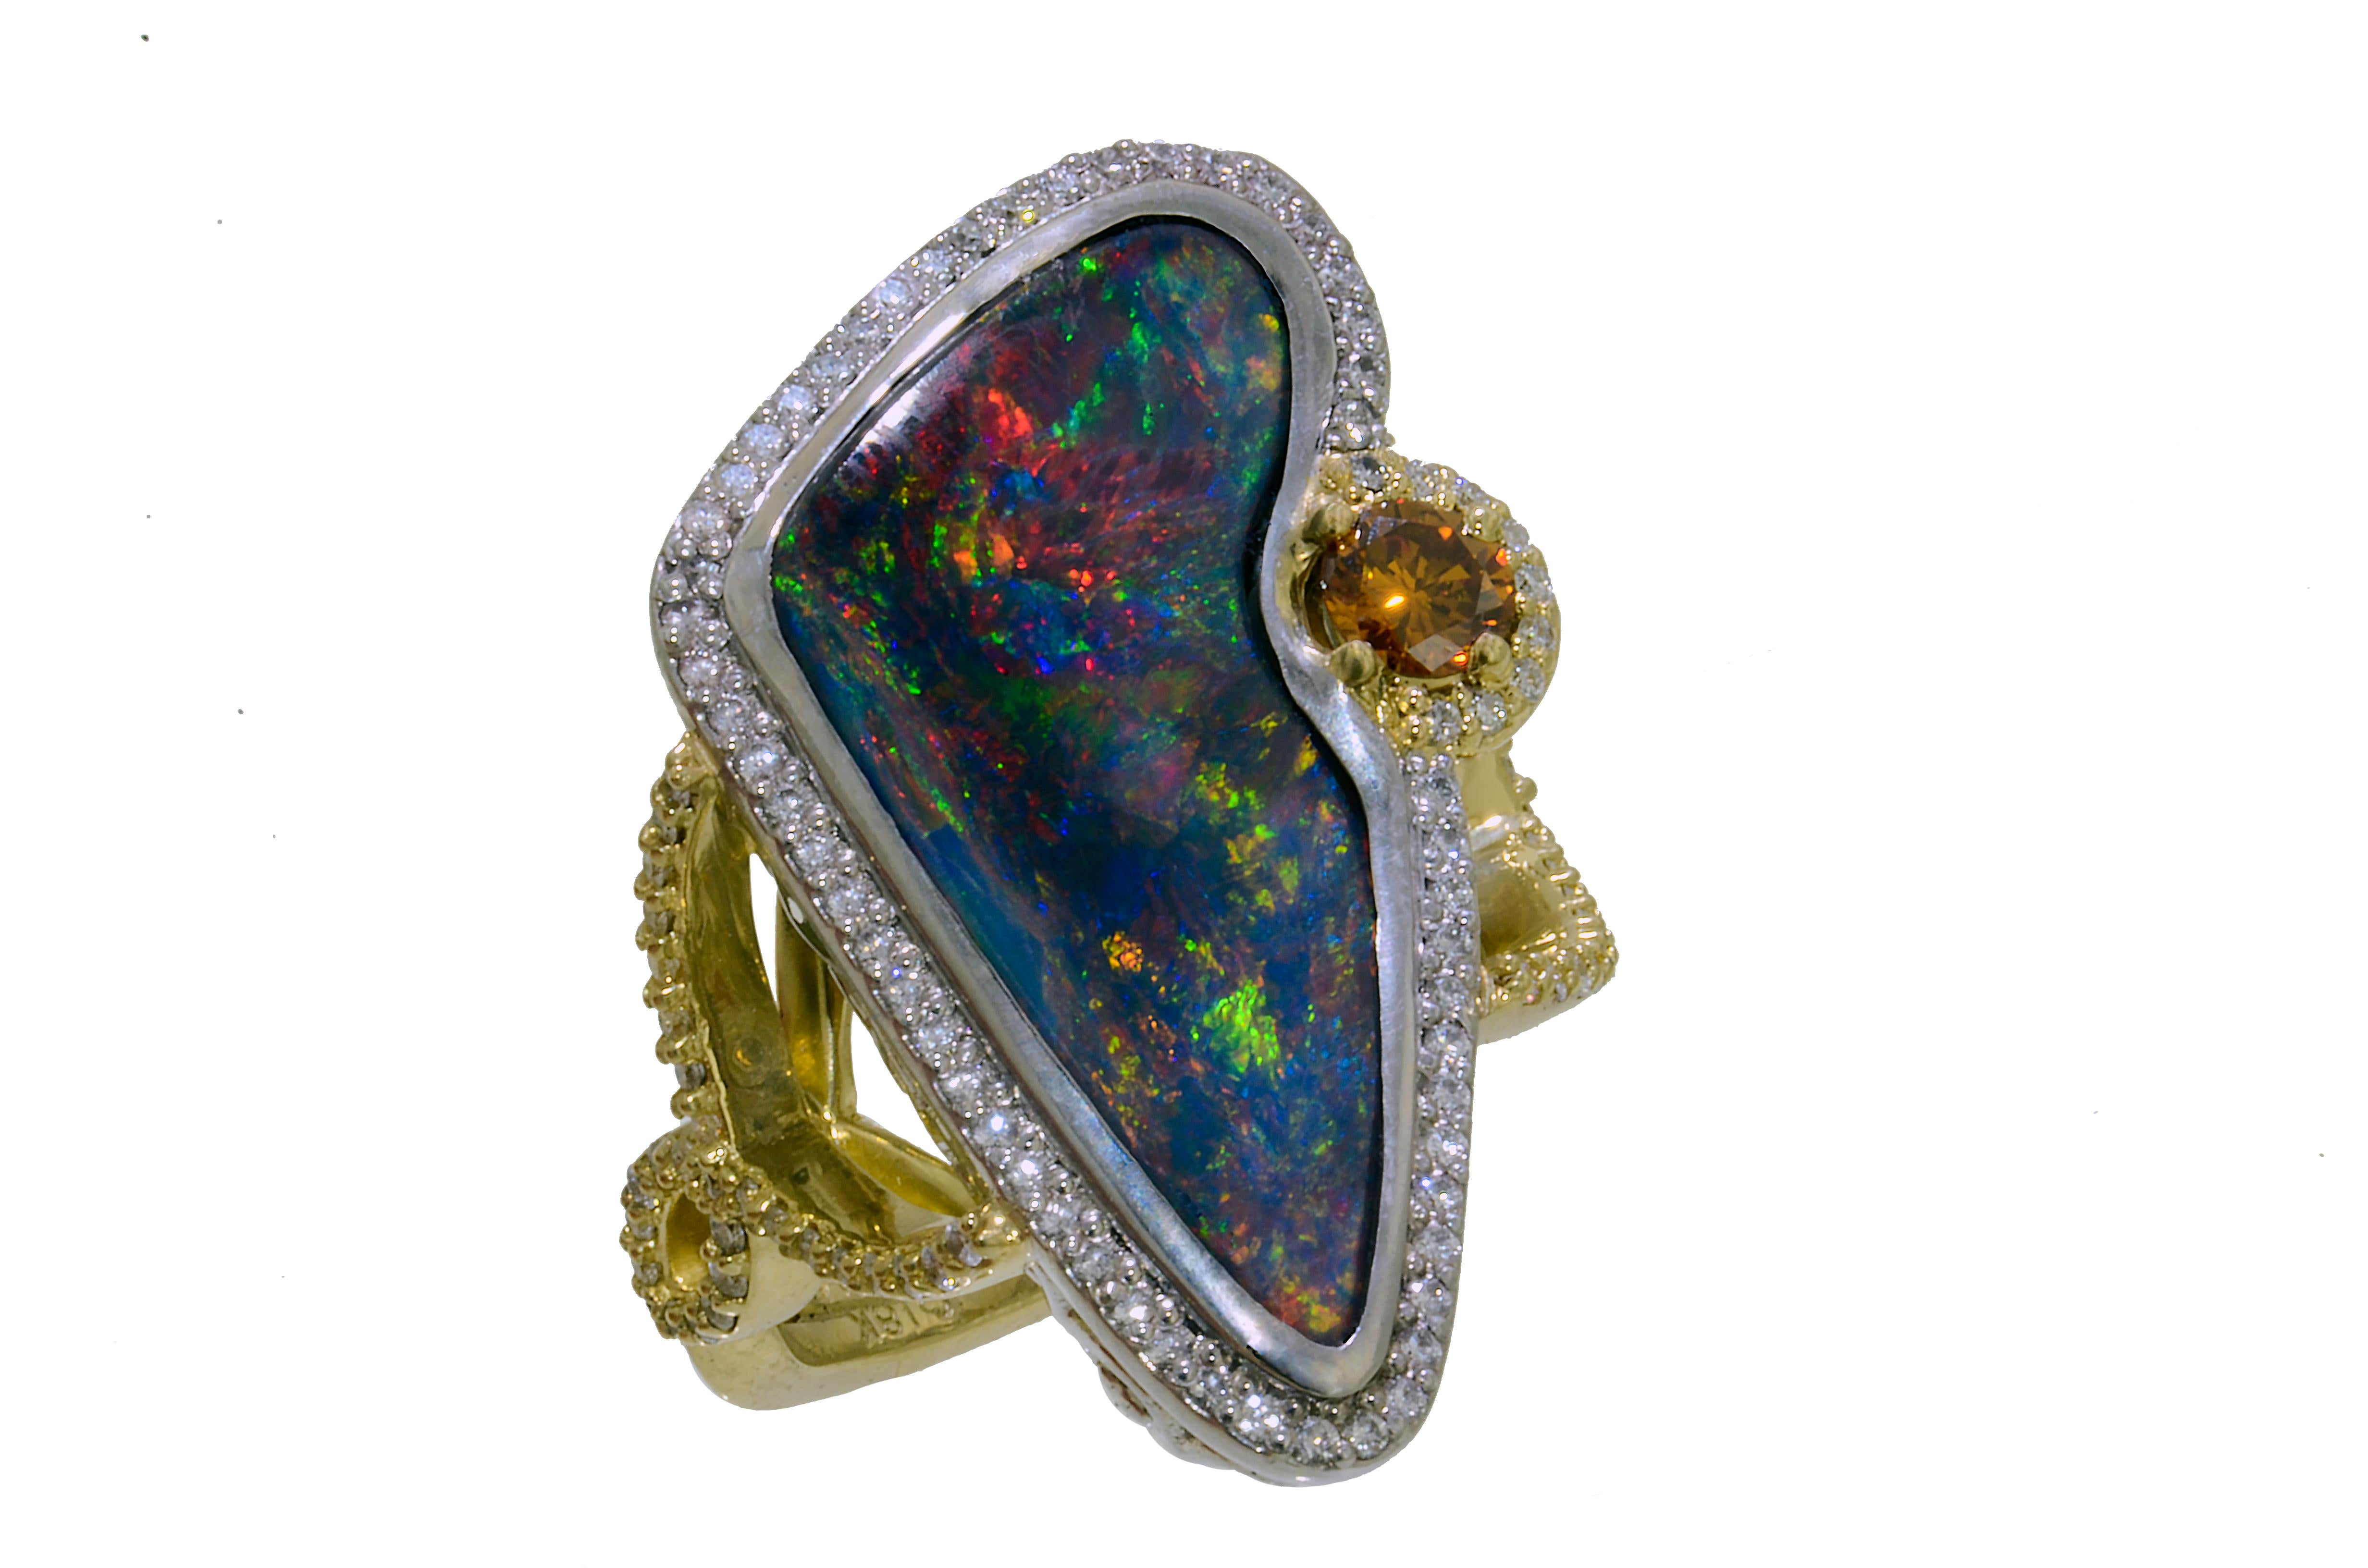 Lithos 18K Yellow Gold, Platinum, Lightning Ridge Opal, Diamond Ring. The natural black opal is from Lightning Ridge Australia. It weighs 9.51 carats. The opal is free formed. It has red, blue and green predominate pin fire. The opal measures 16.18